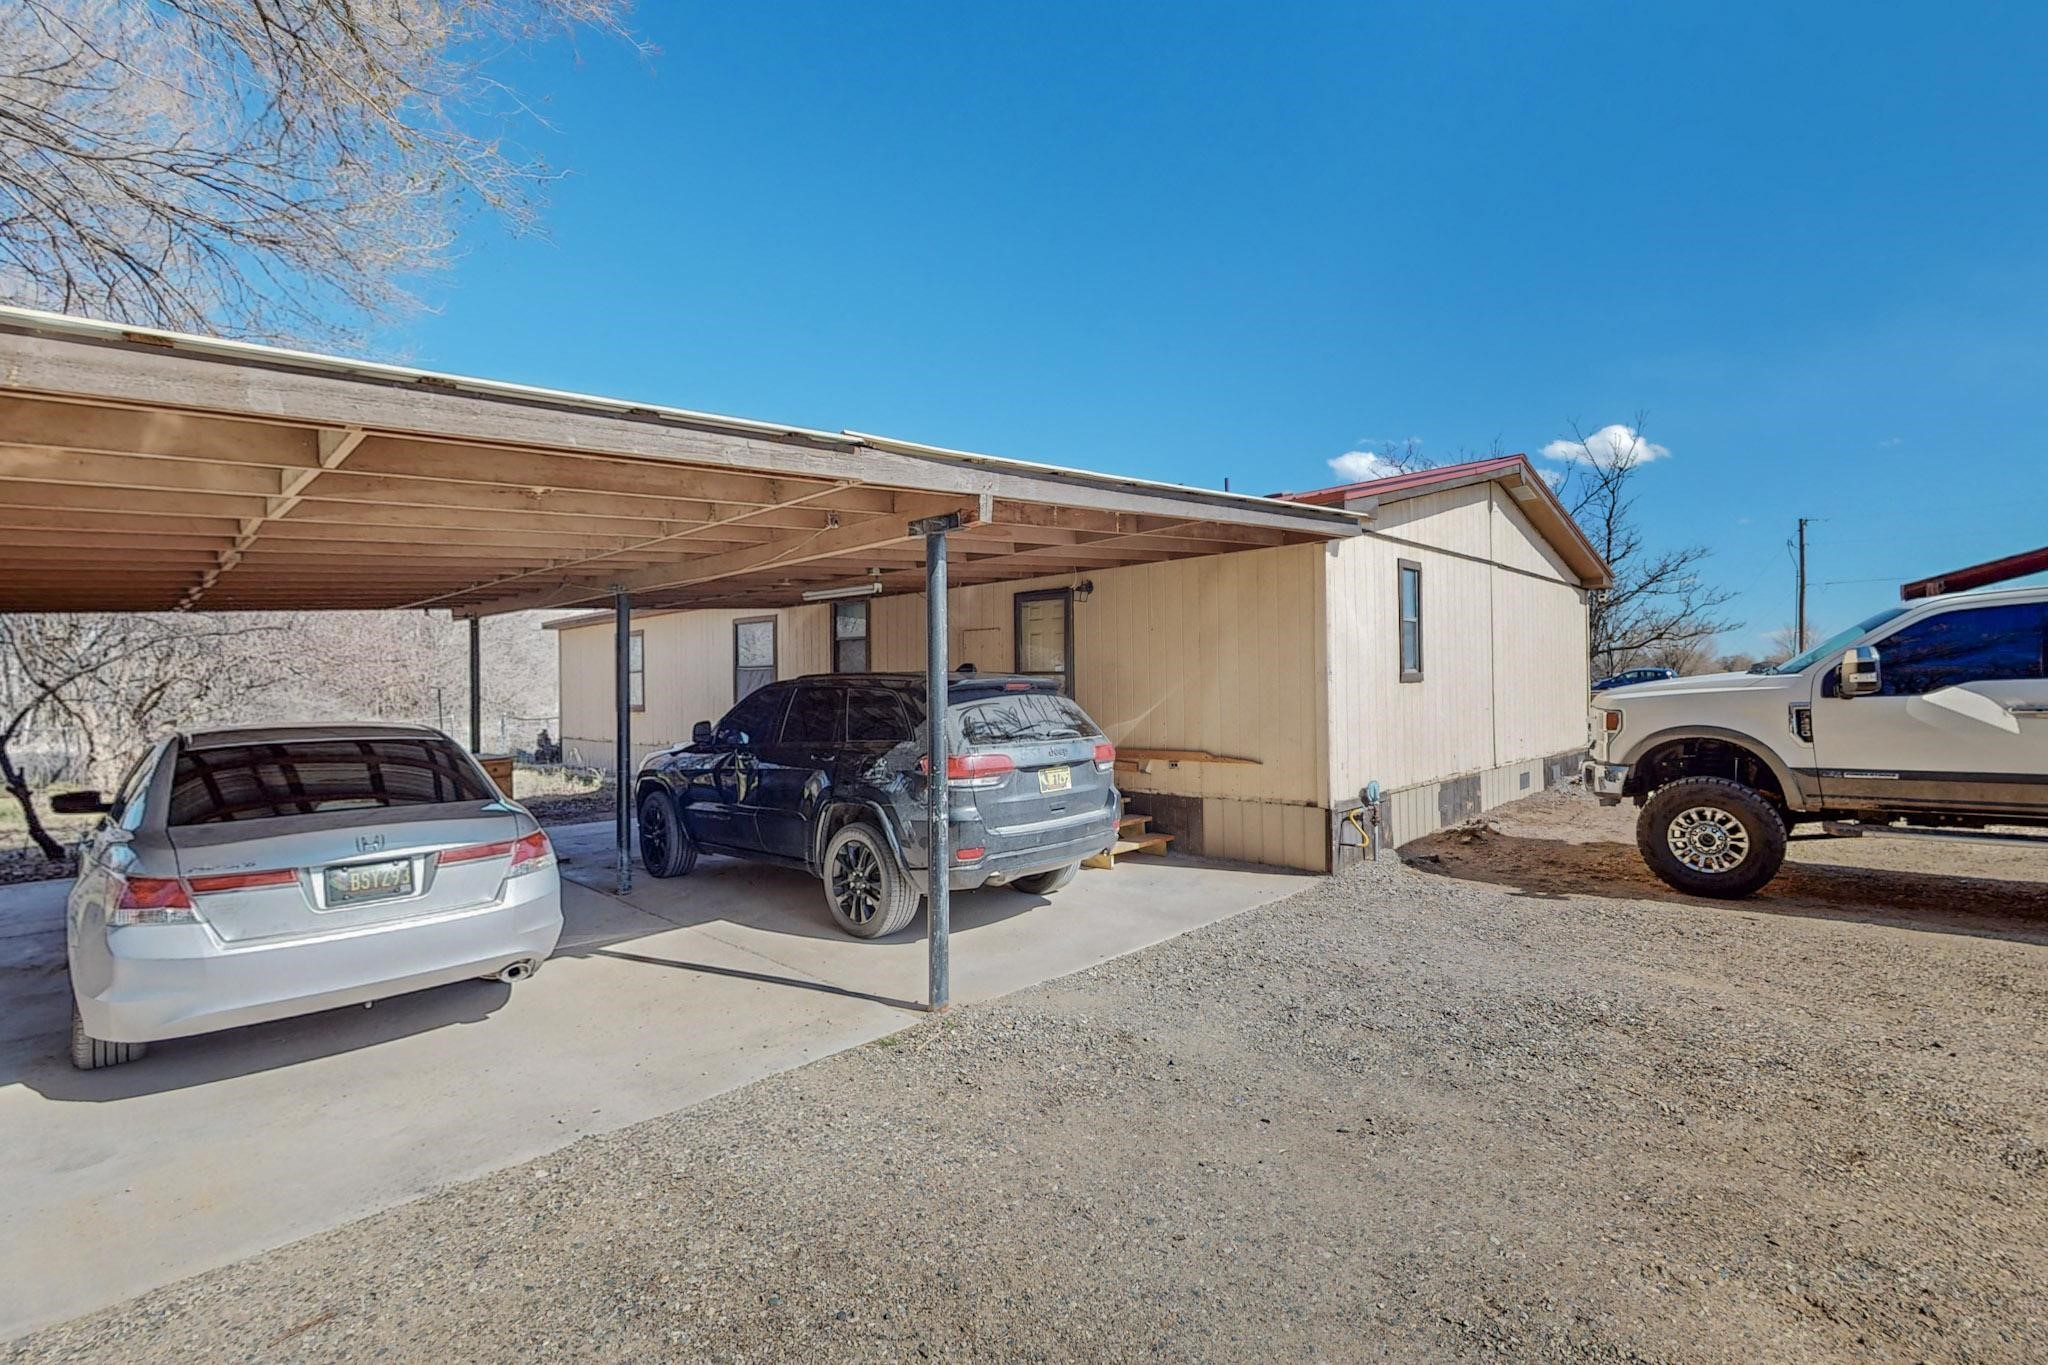 42 Private 1505 Drive, Espanola, New Mexico 87532, 3 Bedrooms Bedrooms, ,2 BathroomsBathrooms,Residential,For Sale,42 Private 1505 Drive,202401224